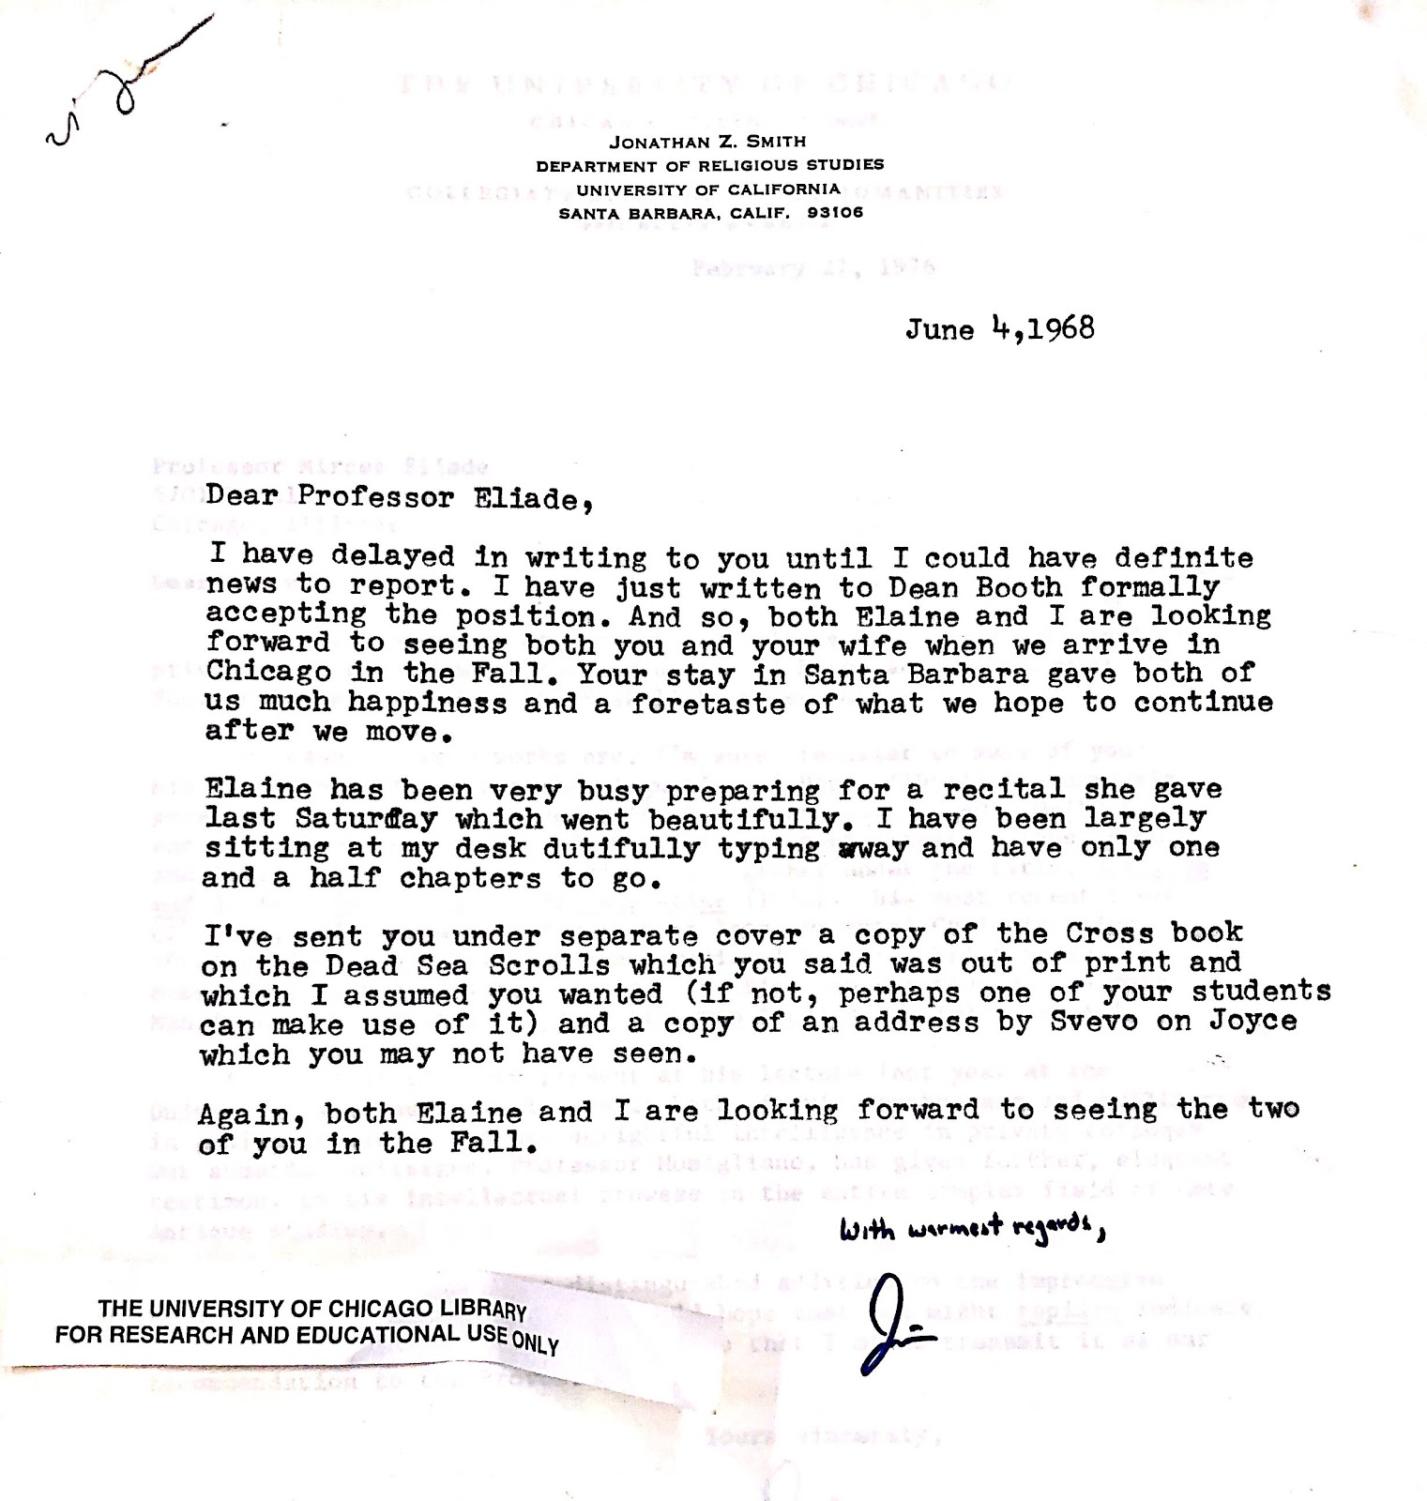 A June 4, 1968 letter from Smith to Eliade.